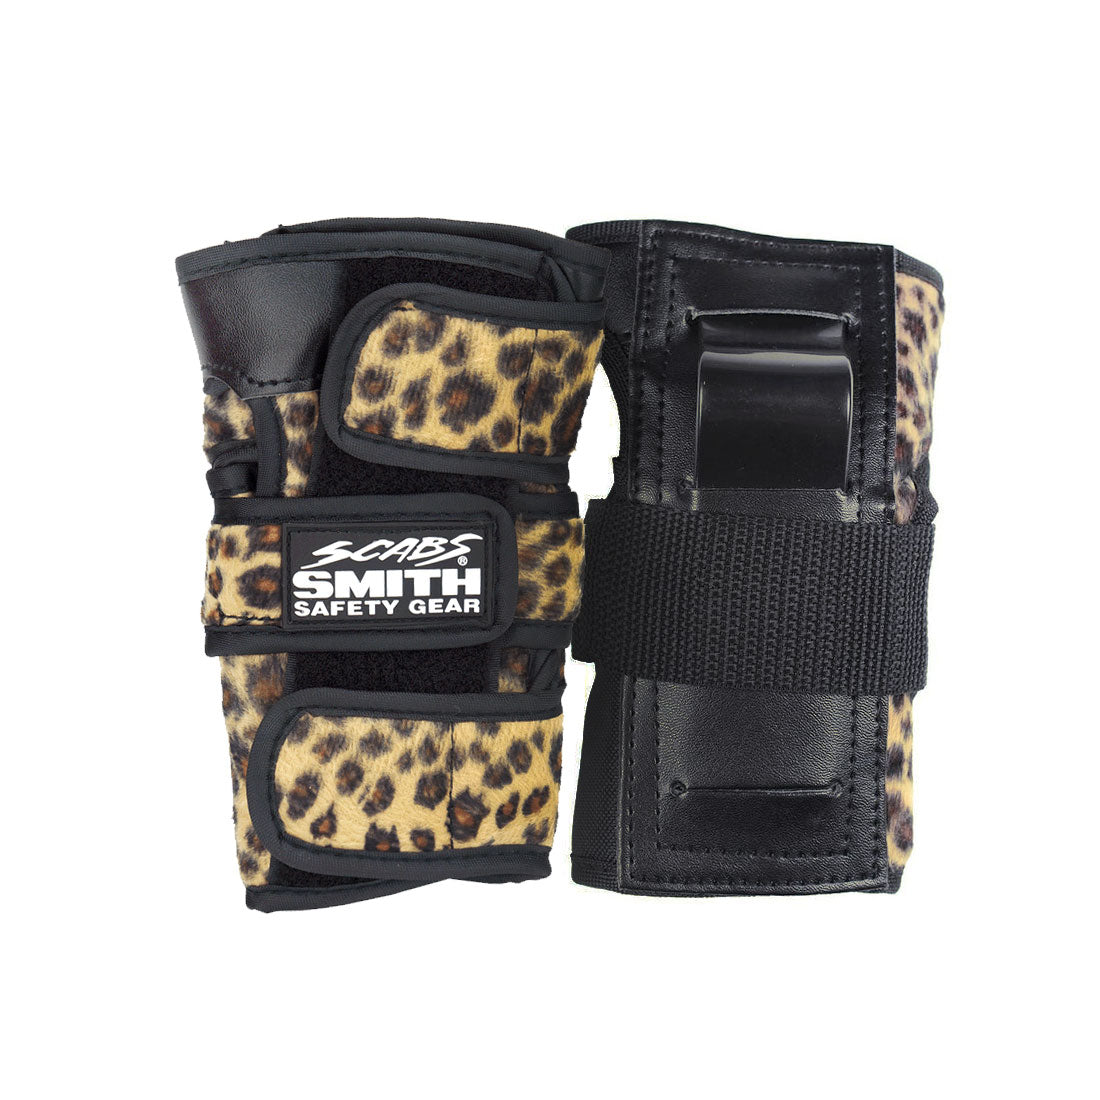 Smith Scabs Wrist Guards - Leopard Protective Gear